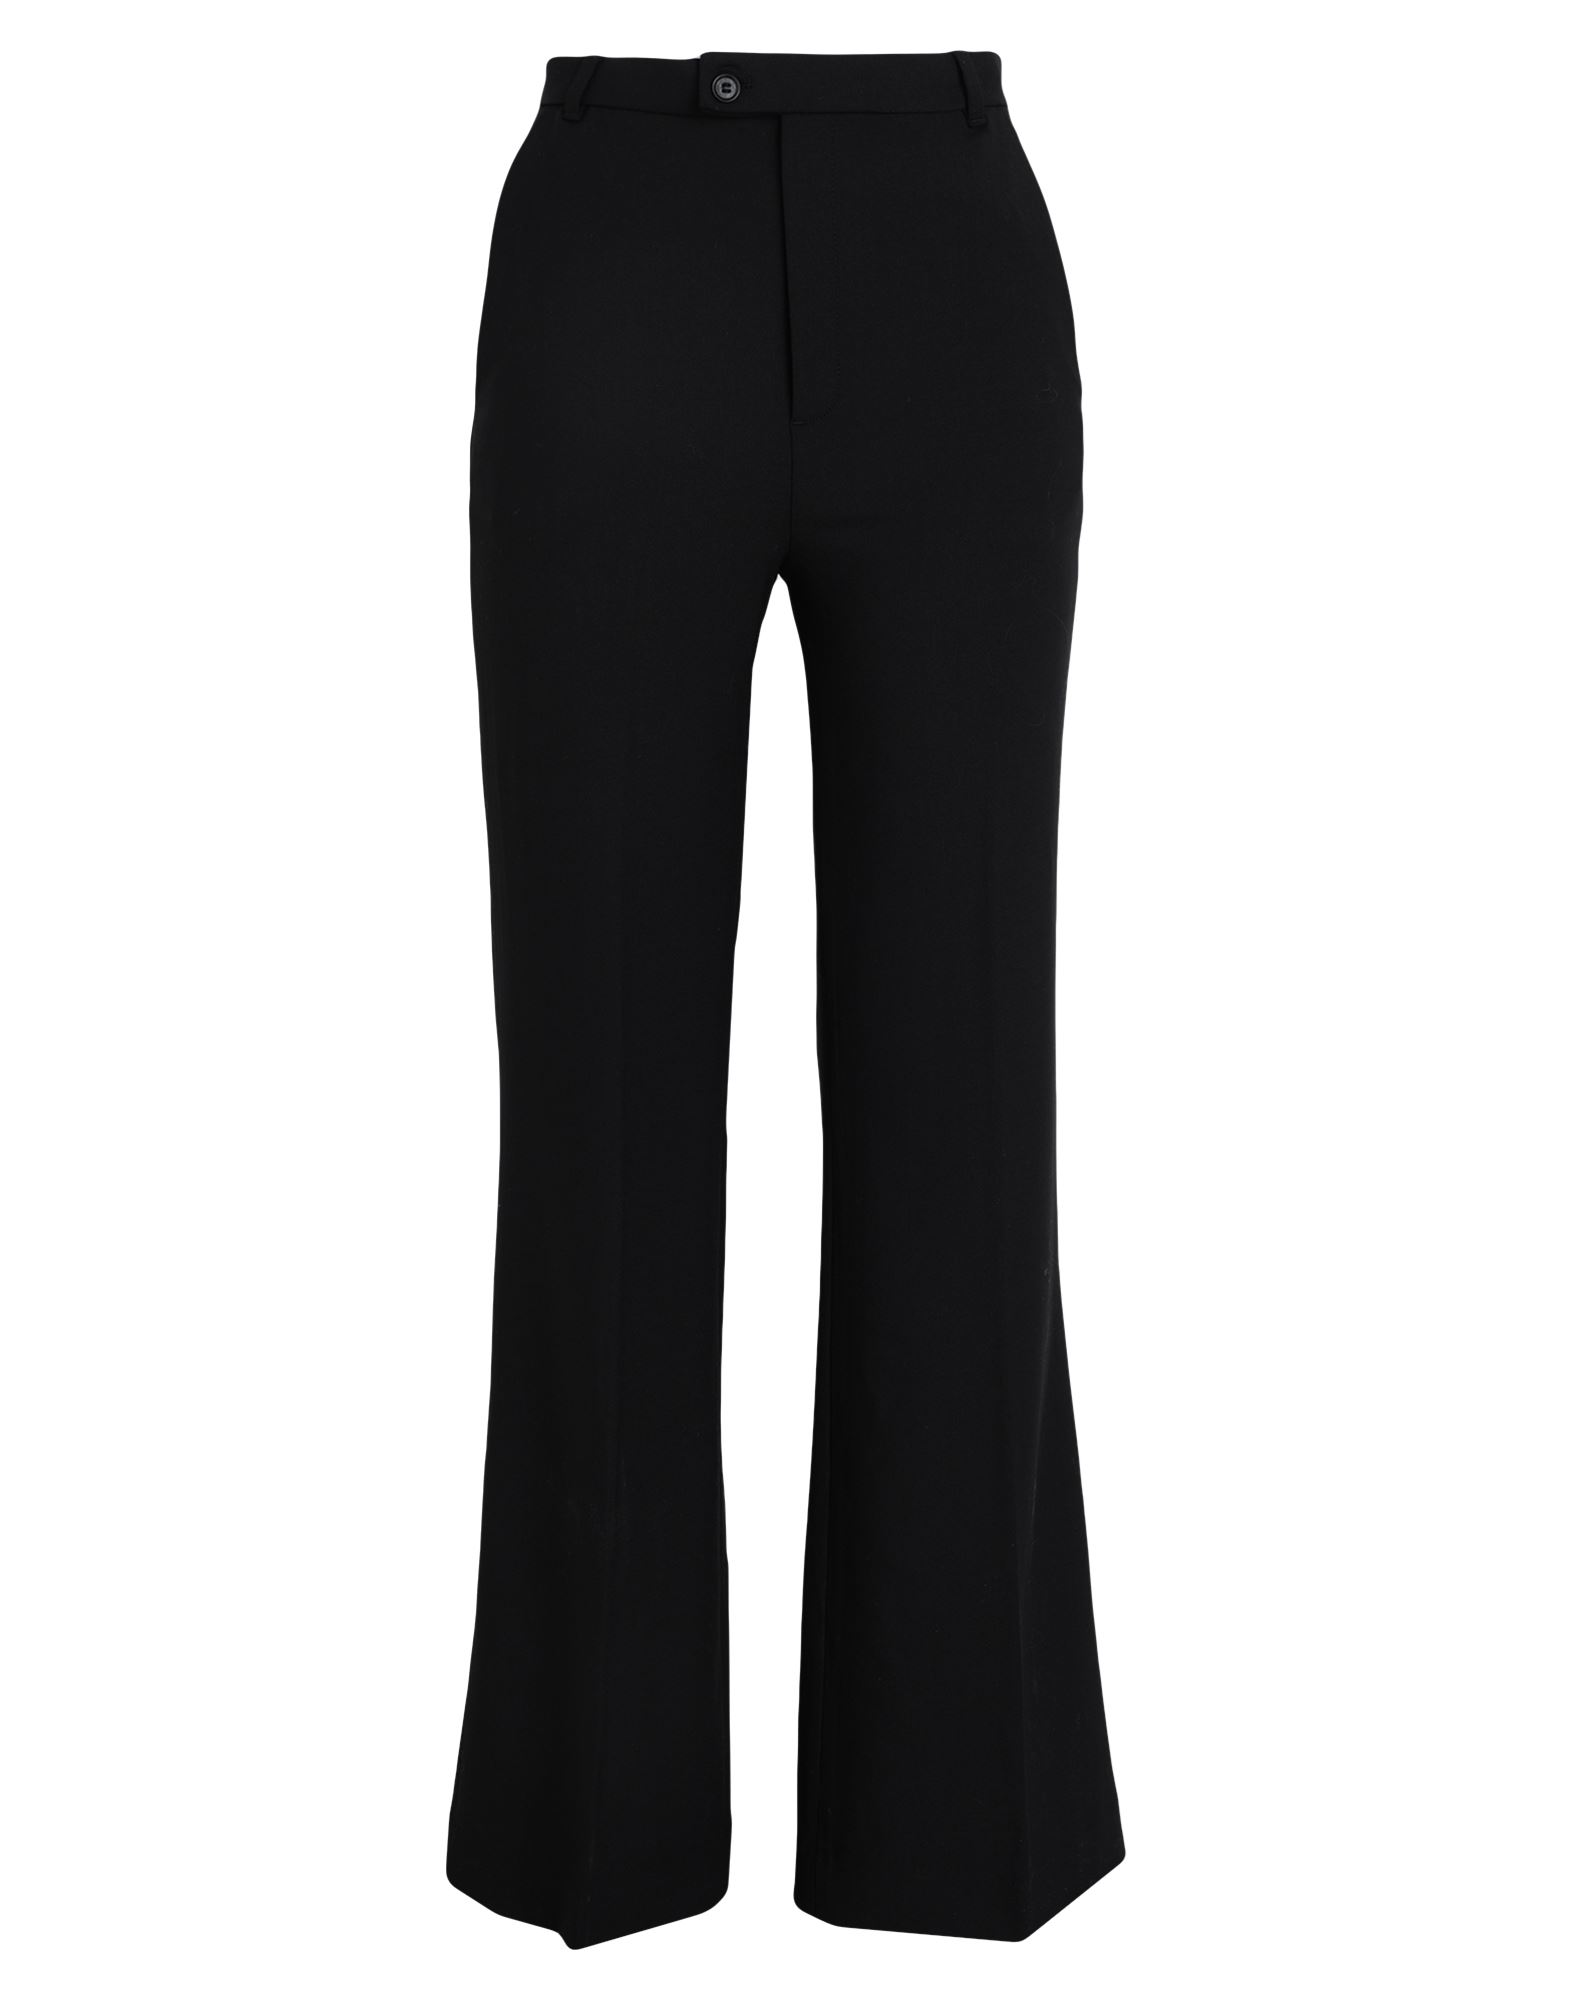  OTHER STORIES High Waist Tapered Trousers in Medium Beige Wool